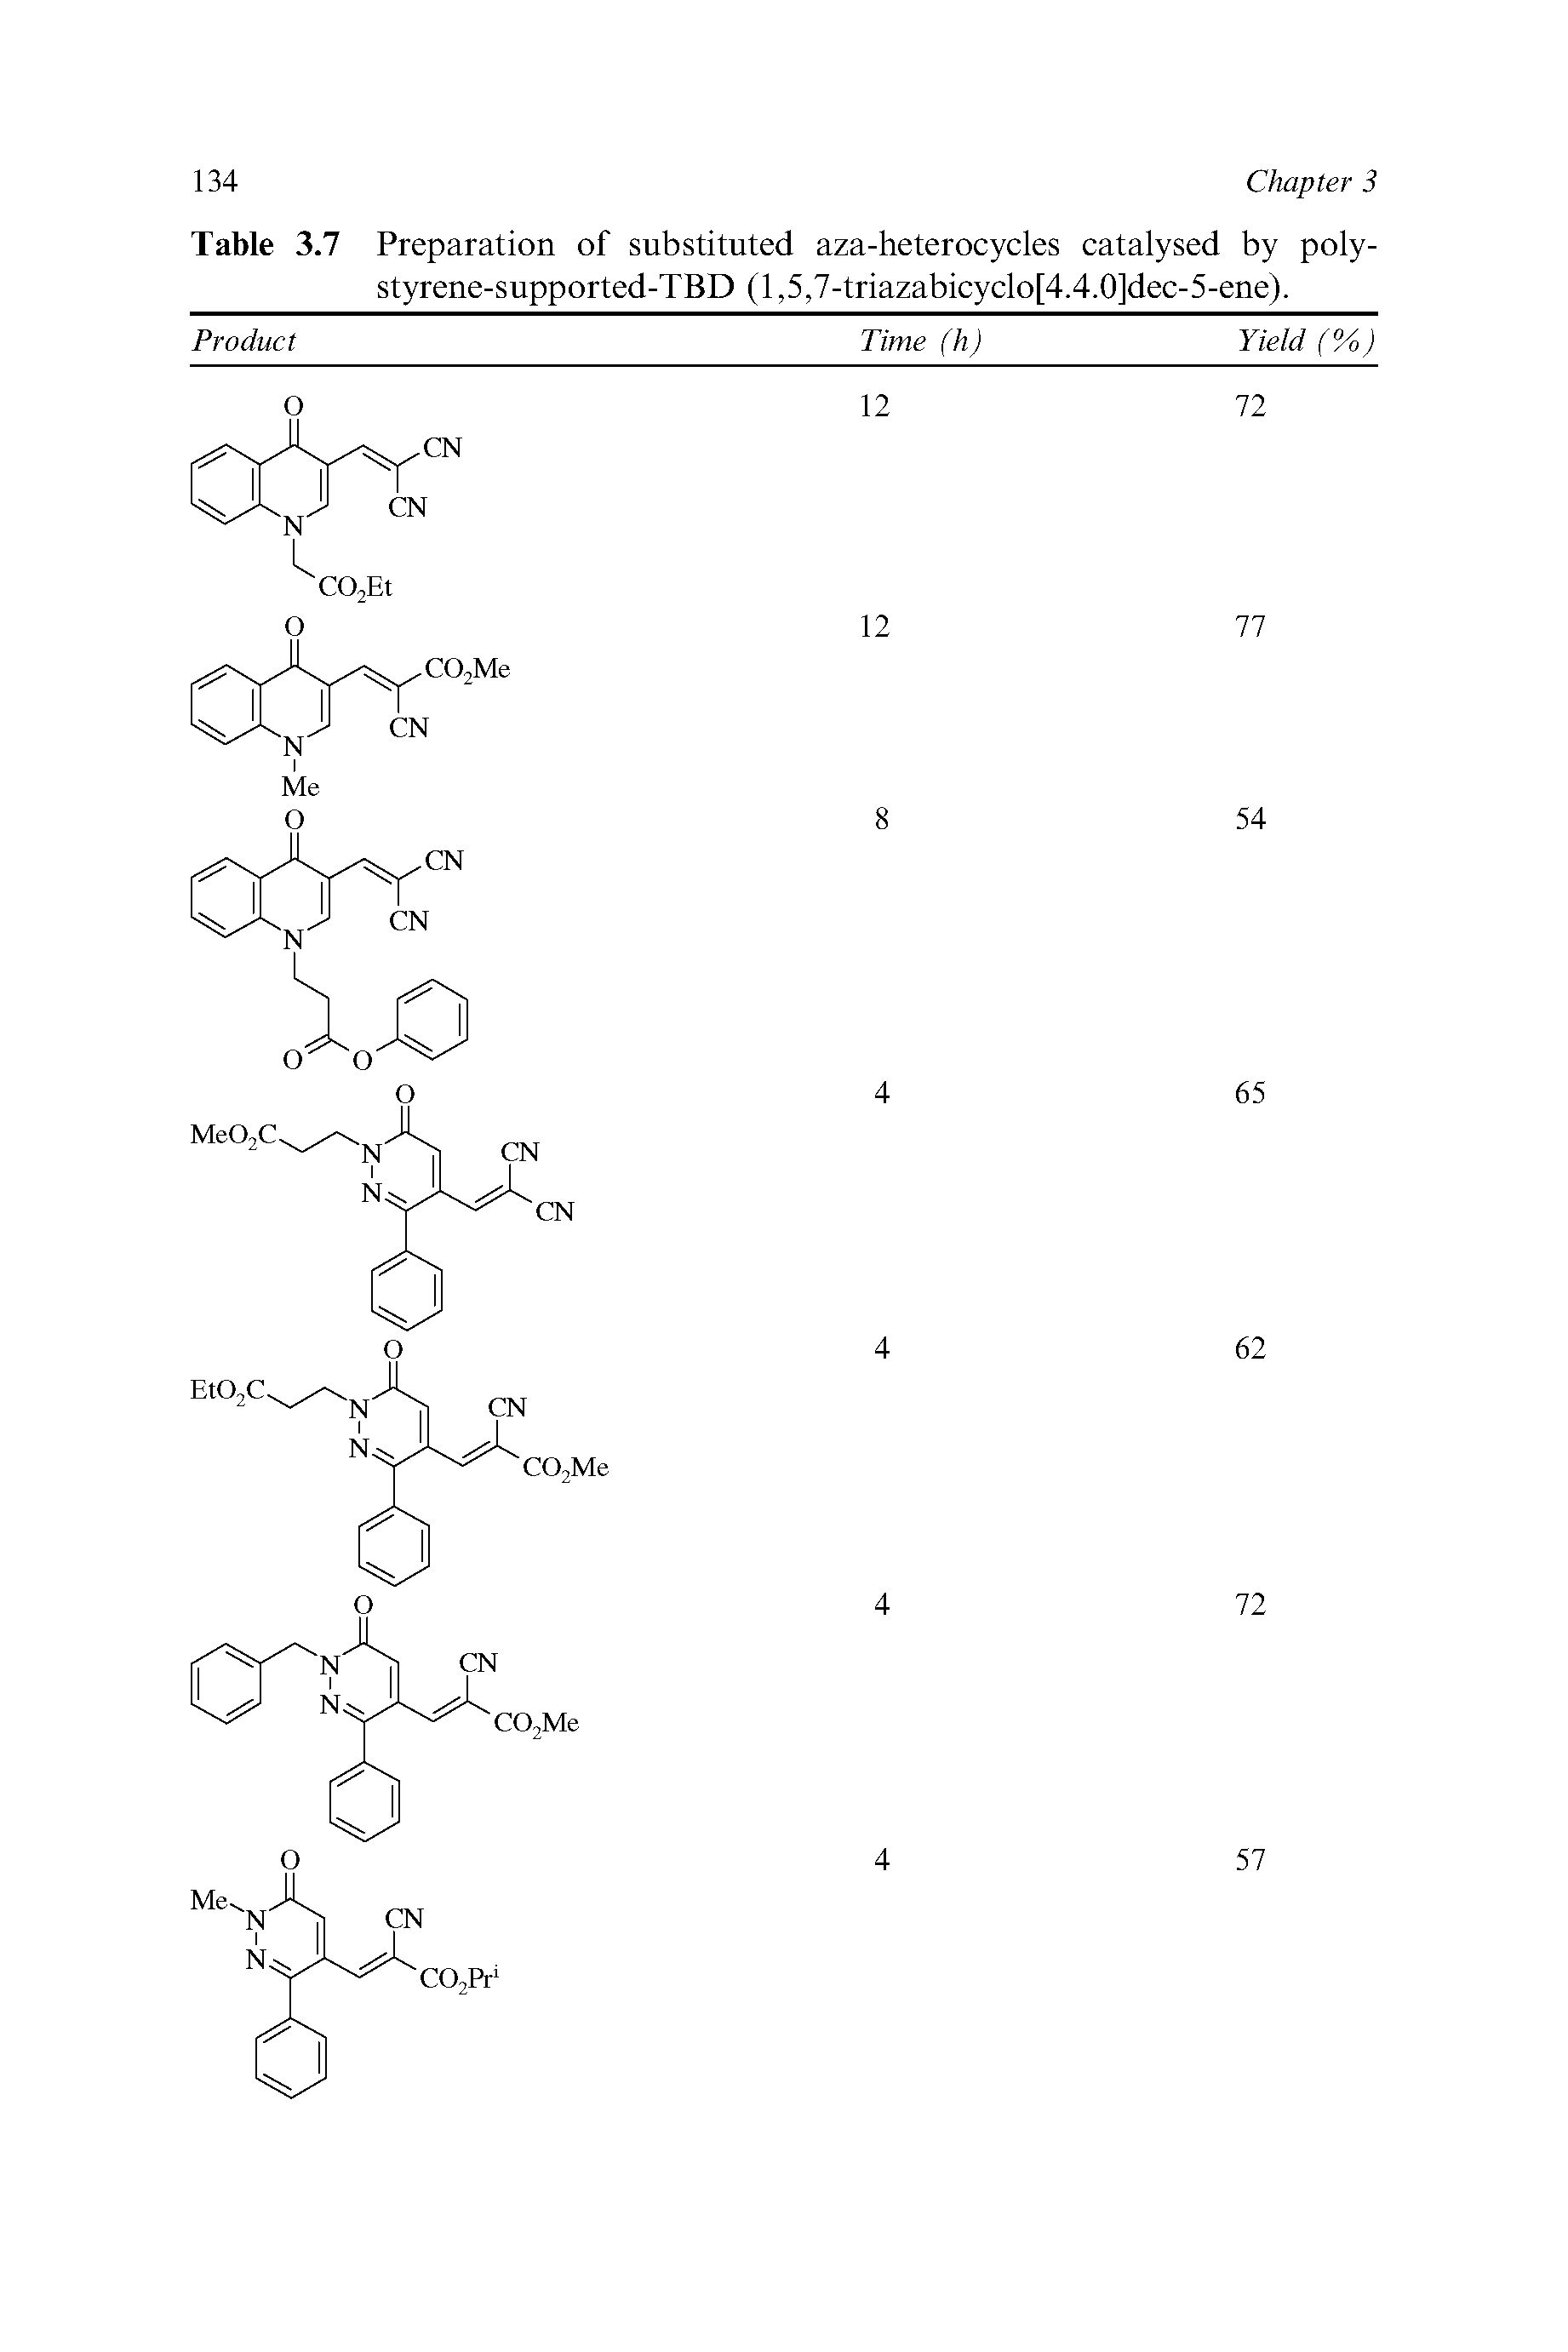 Table 3.7 Preparation of substituted aza-heterocycles catalysed by poly-styrene-supported-TBD (l,5,7-triazabicyclo[4.4.0]dec-5-ene).